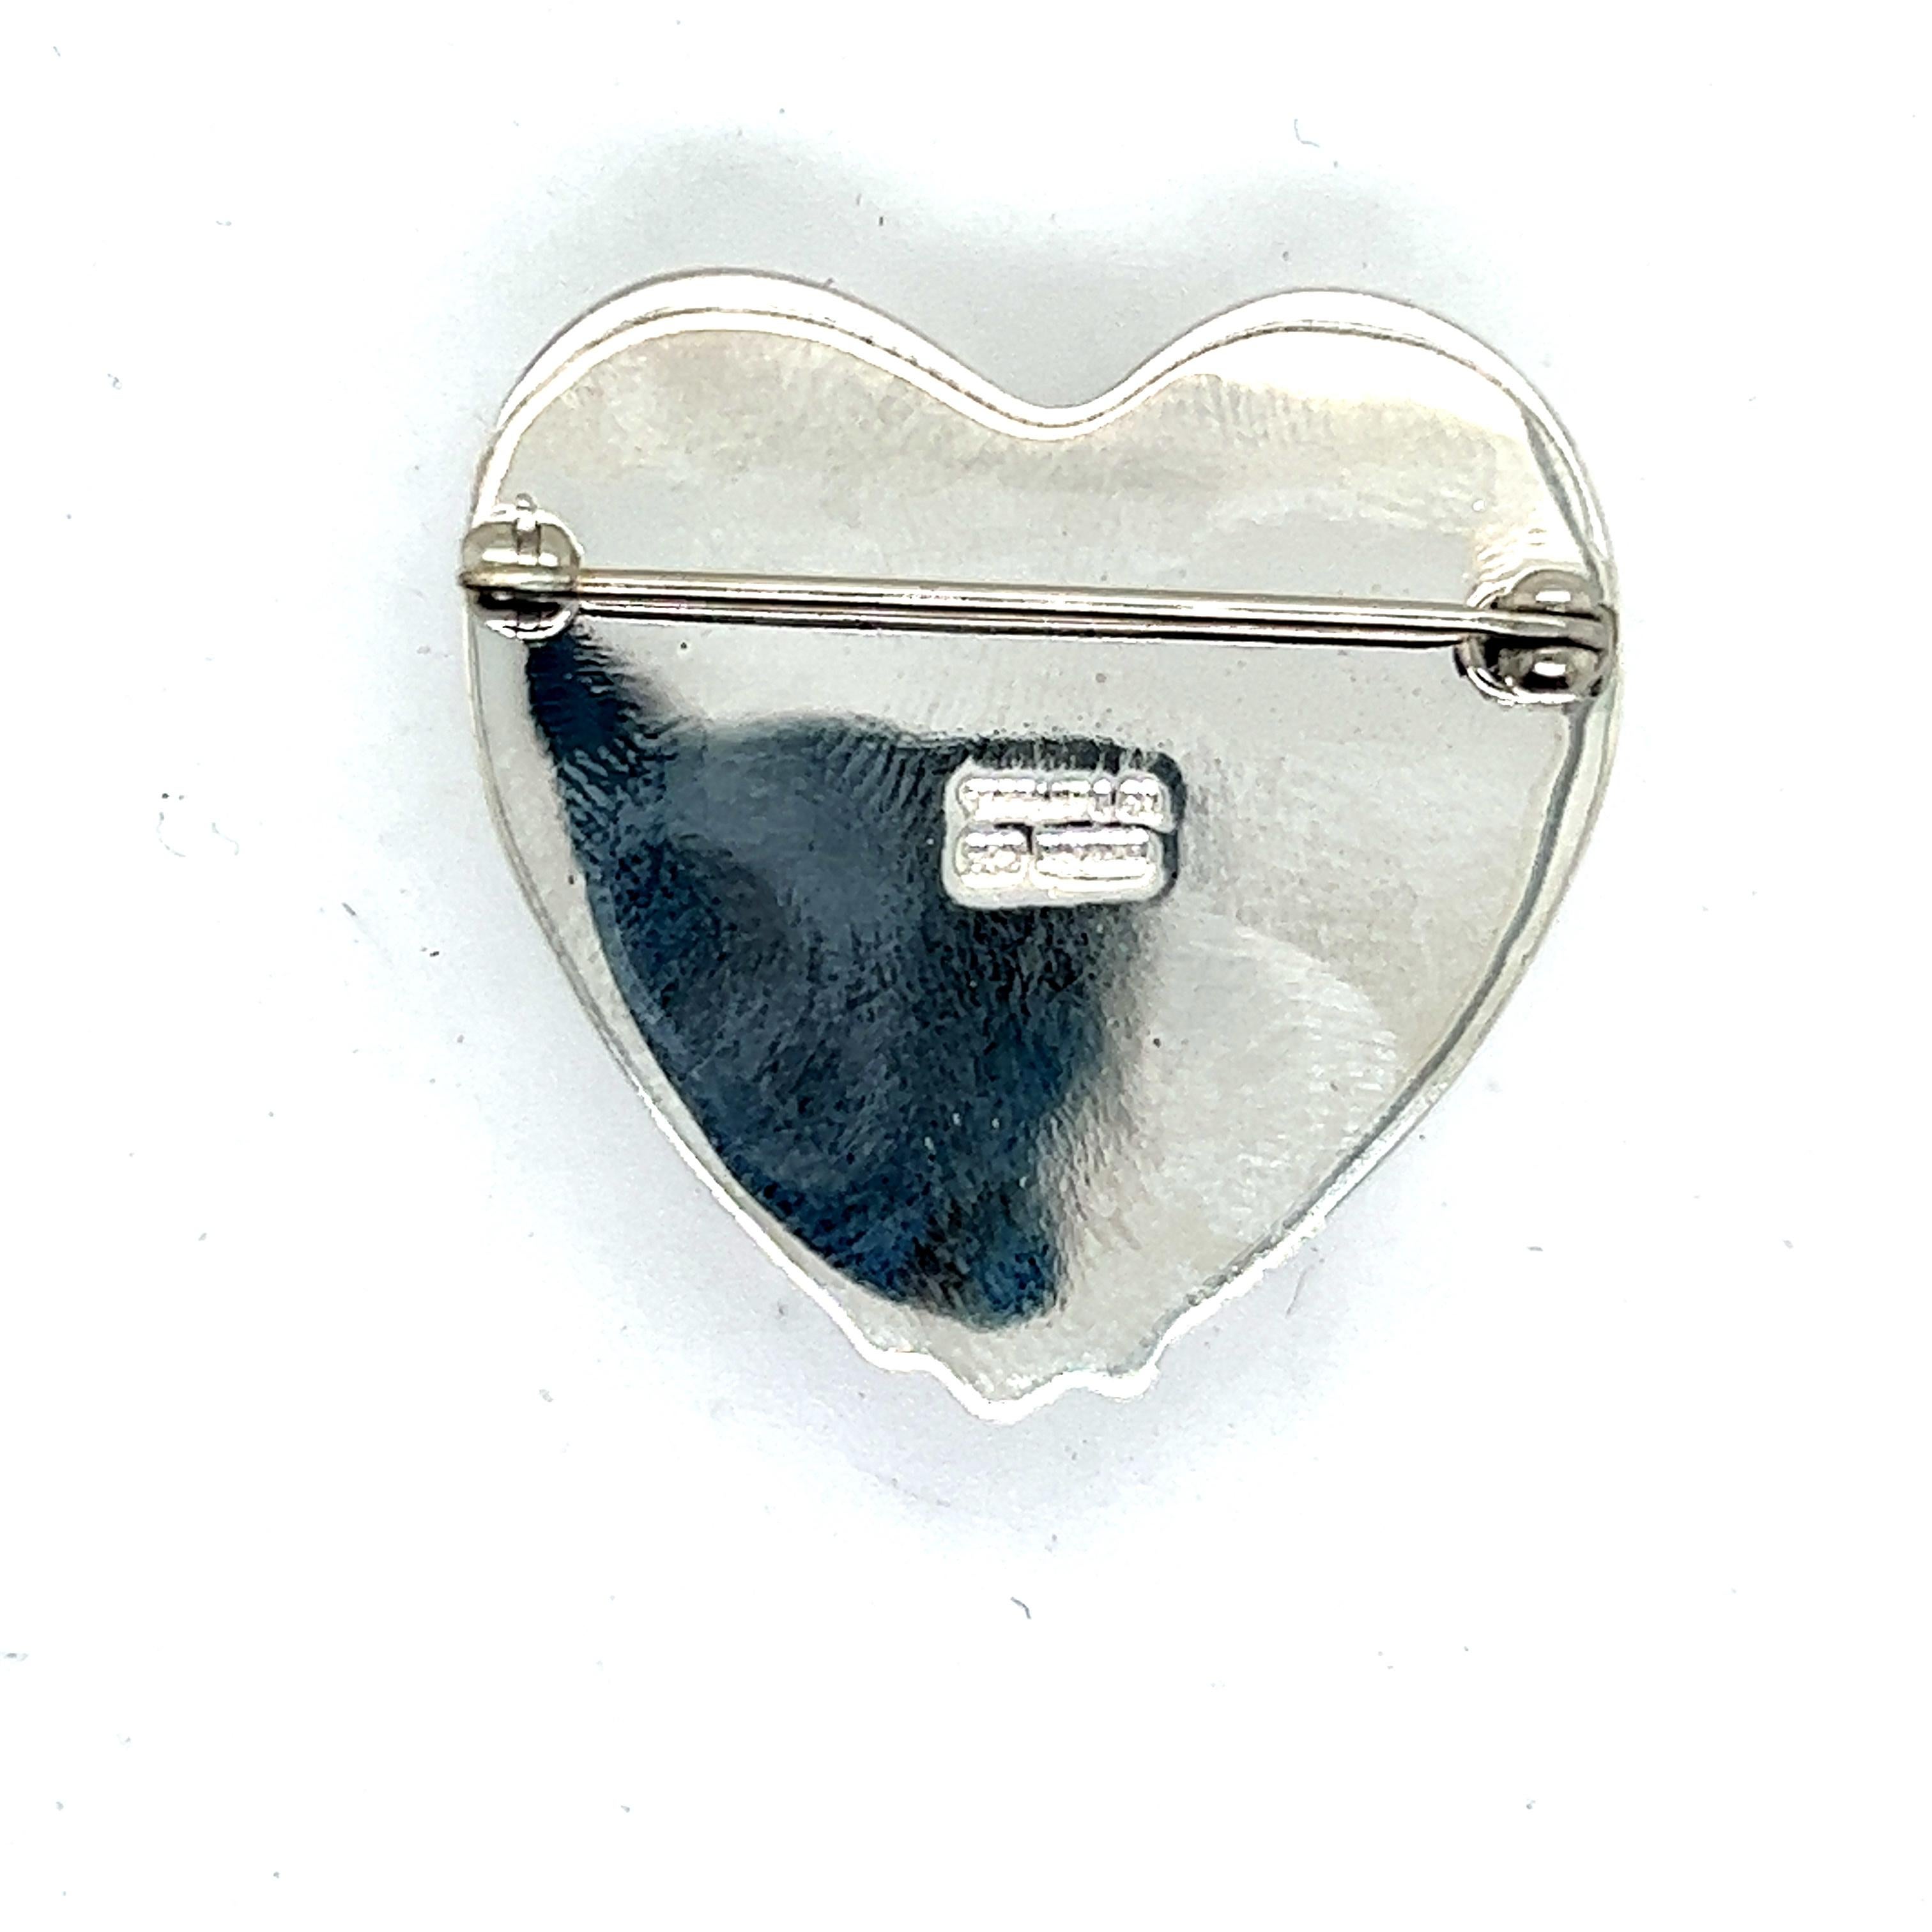 Tiffany & Co. Estate Large Puffed Heart Brooch Pin Silver For Sale 1